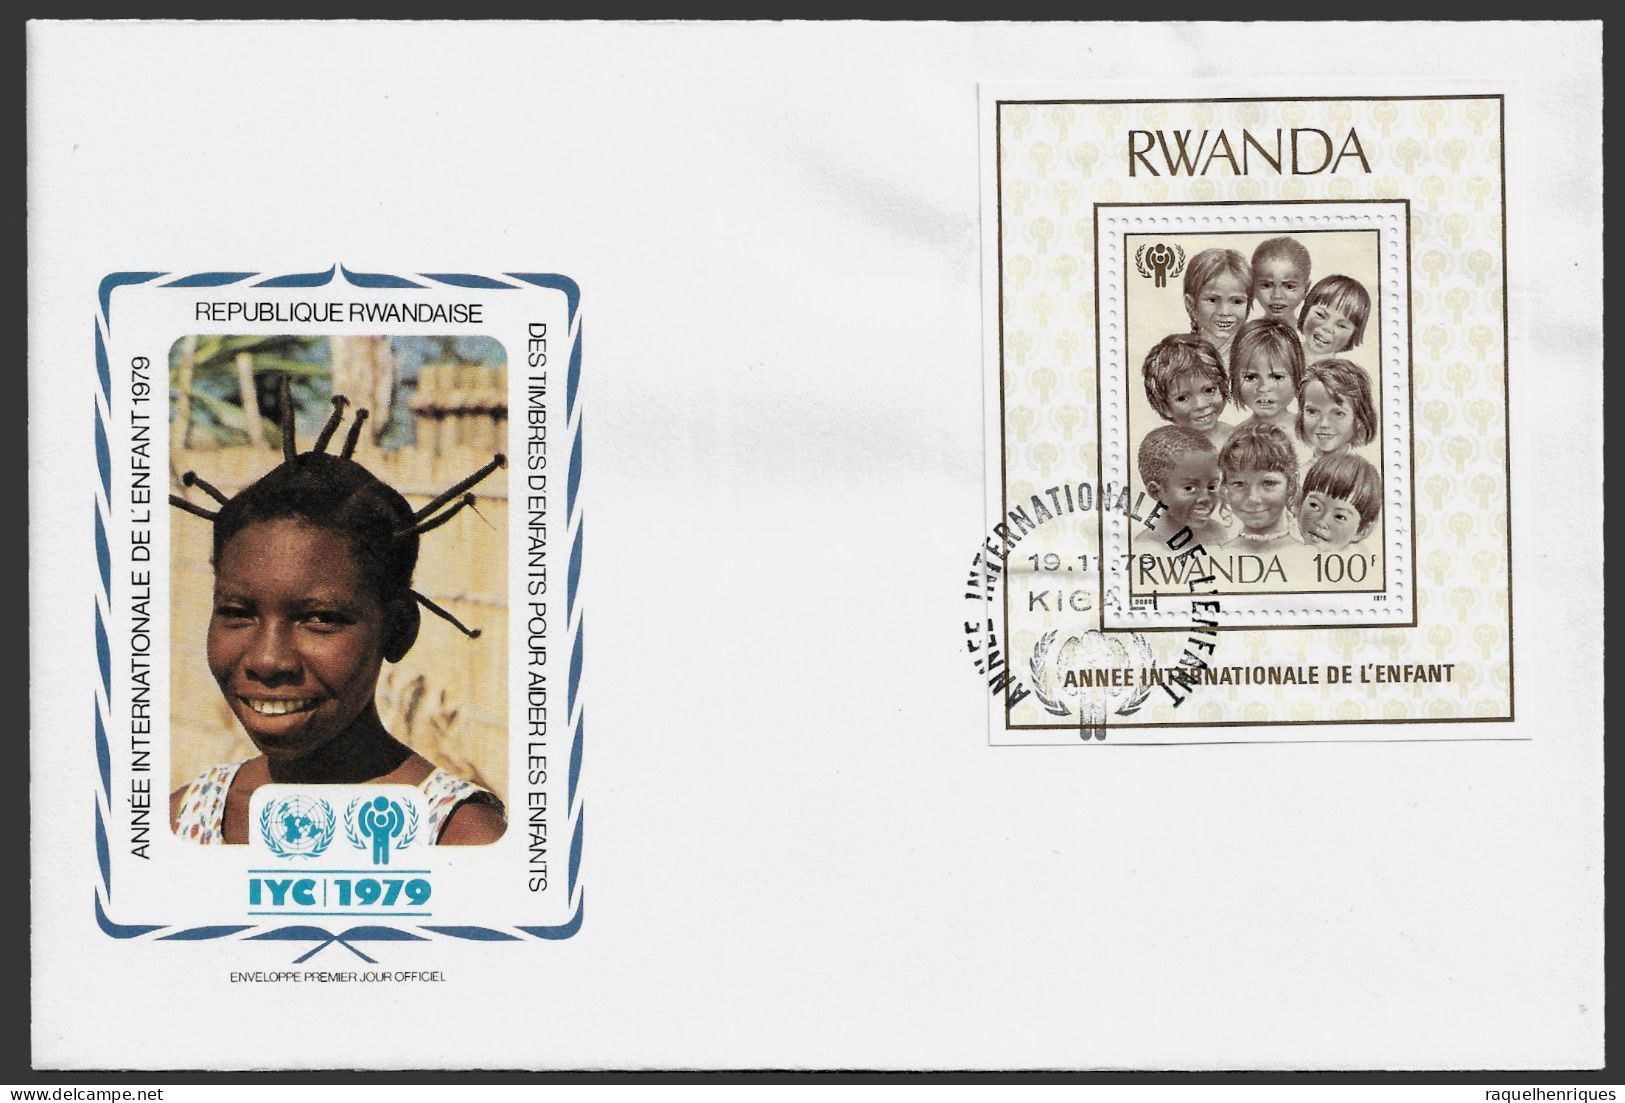 RWANDA FDC COVER - 1979 International Year Of The Child - MINISHEET FDC (FDC79#03) - Covers & Documents